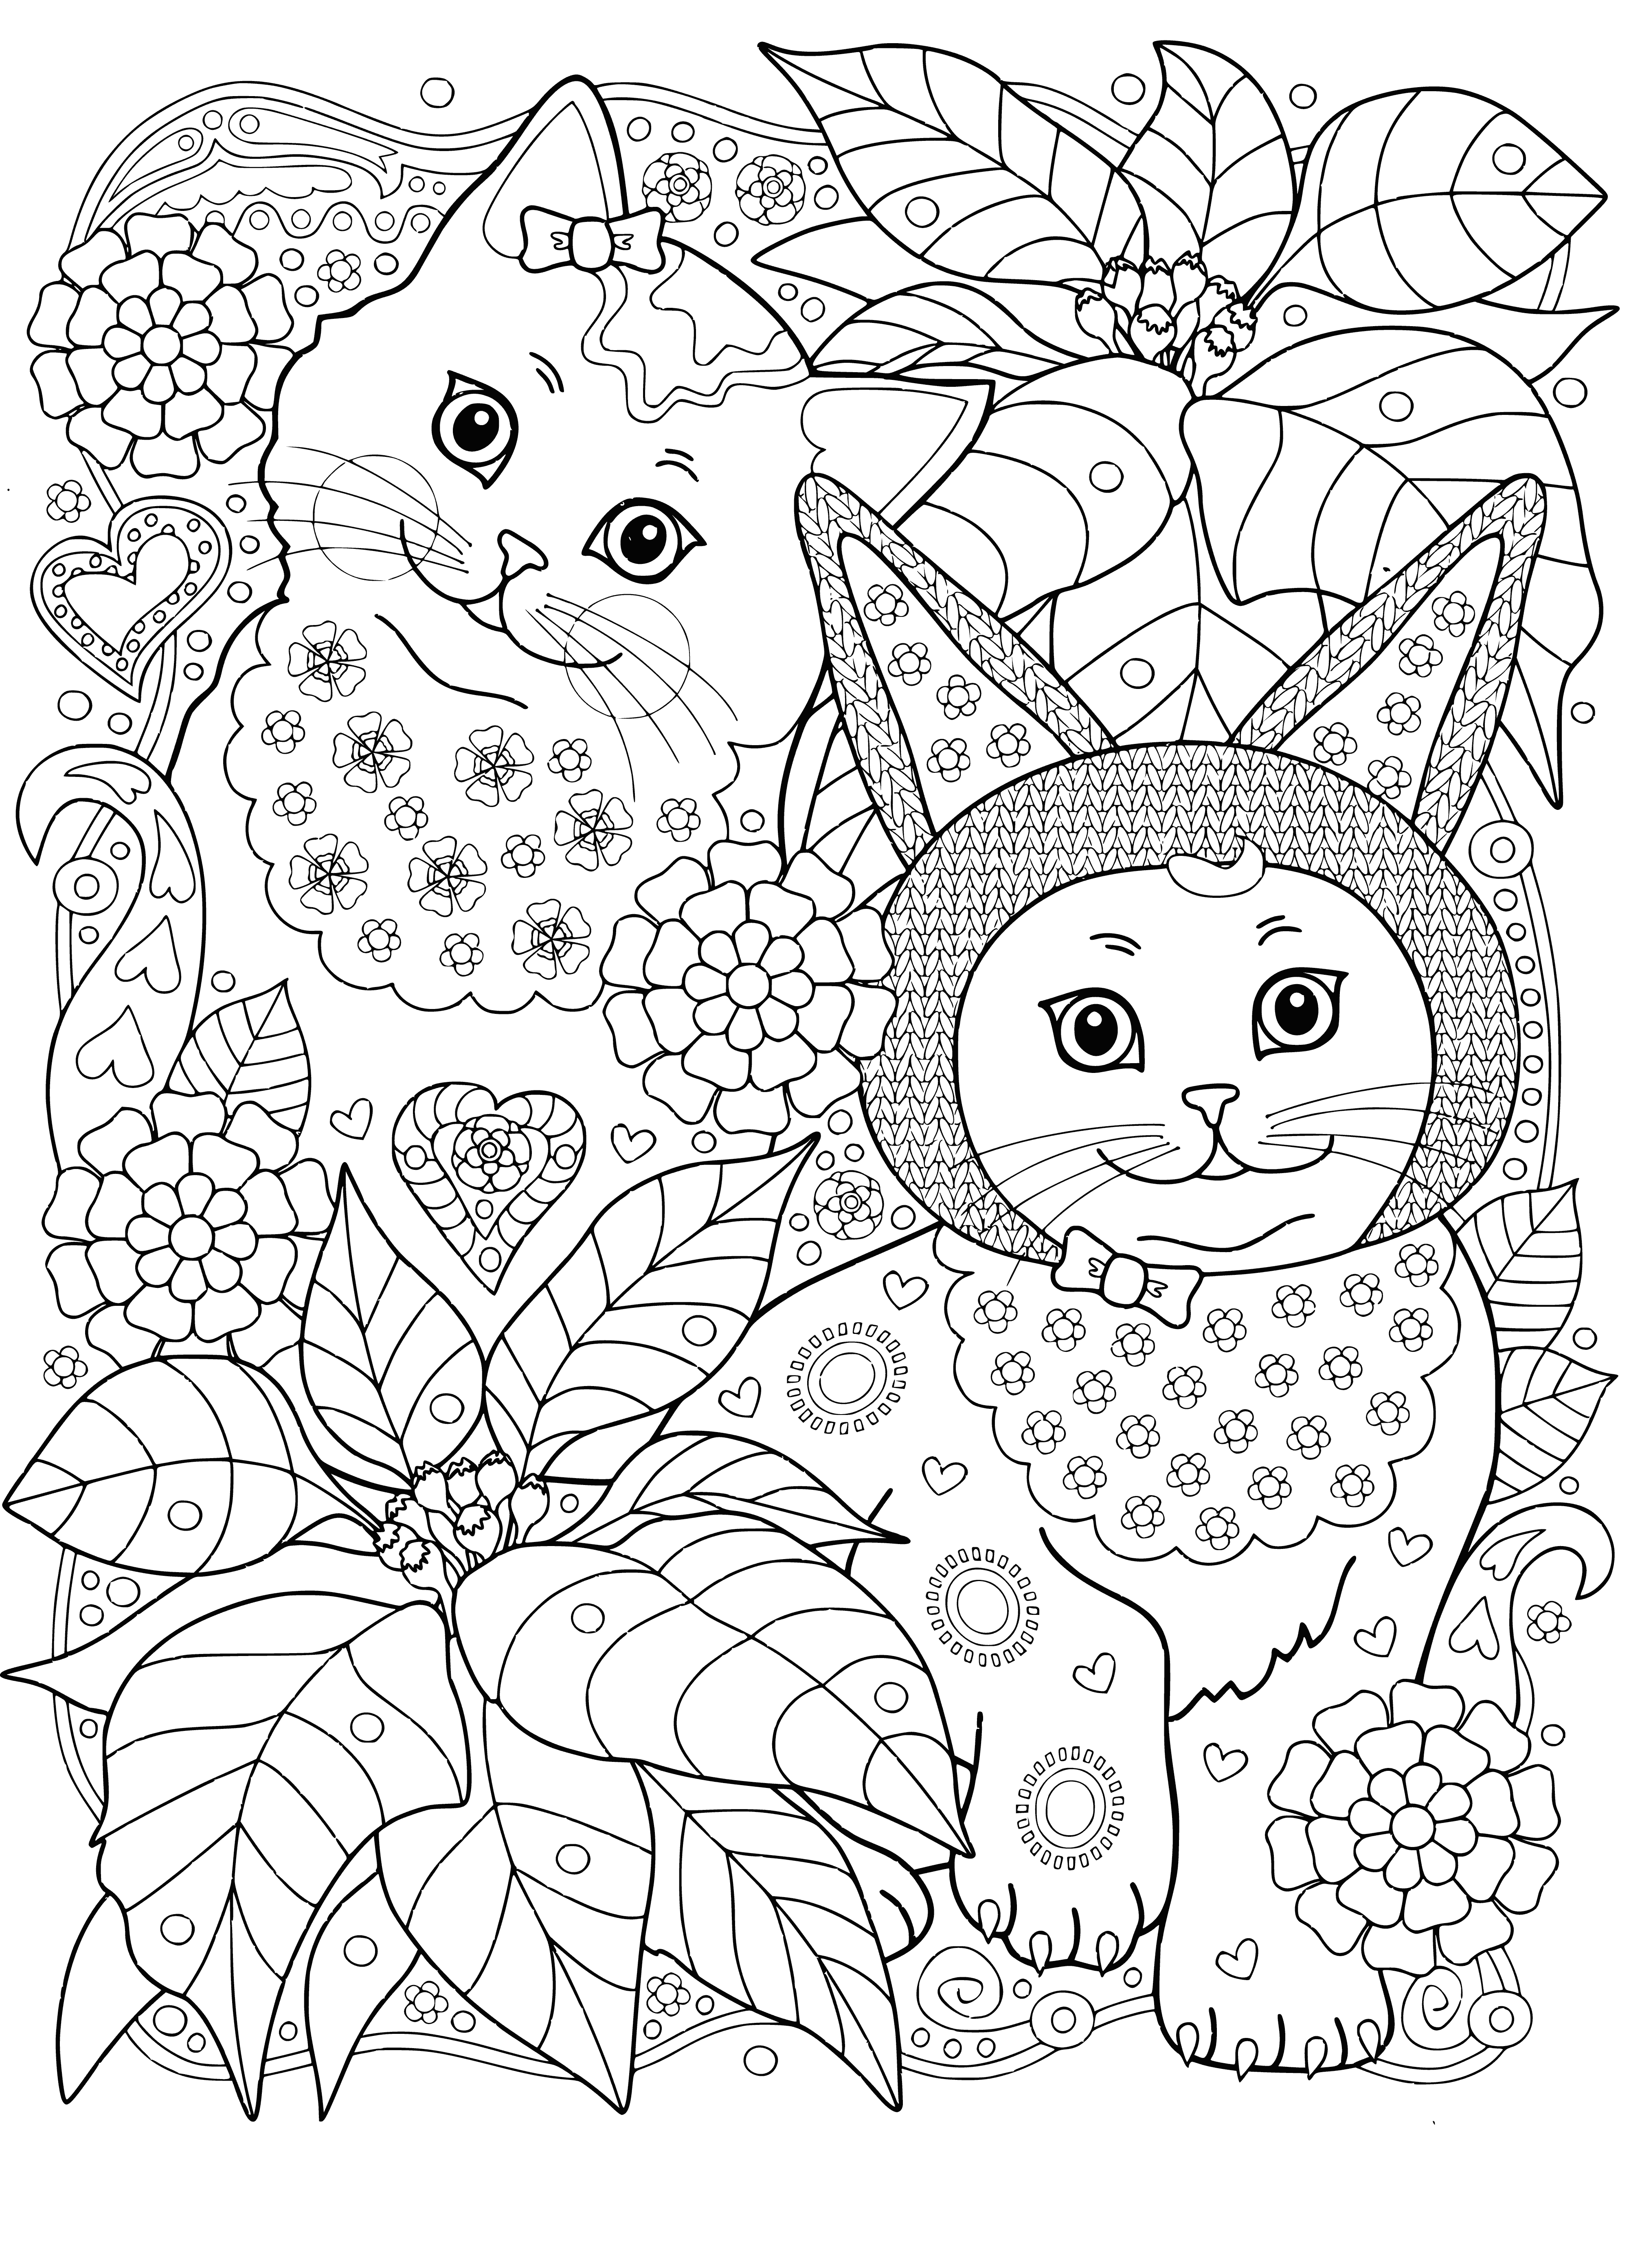 Cats in the garden coloring page